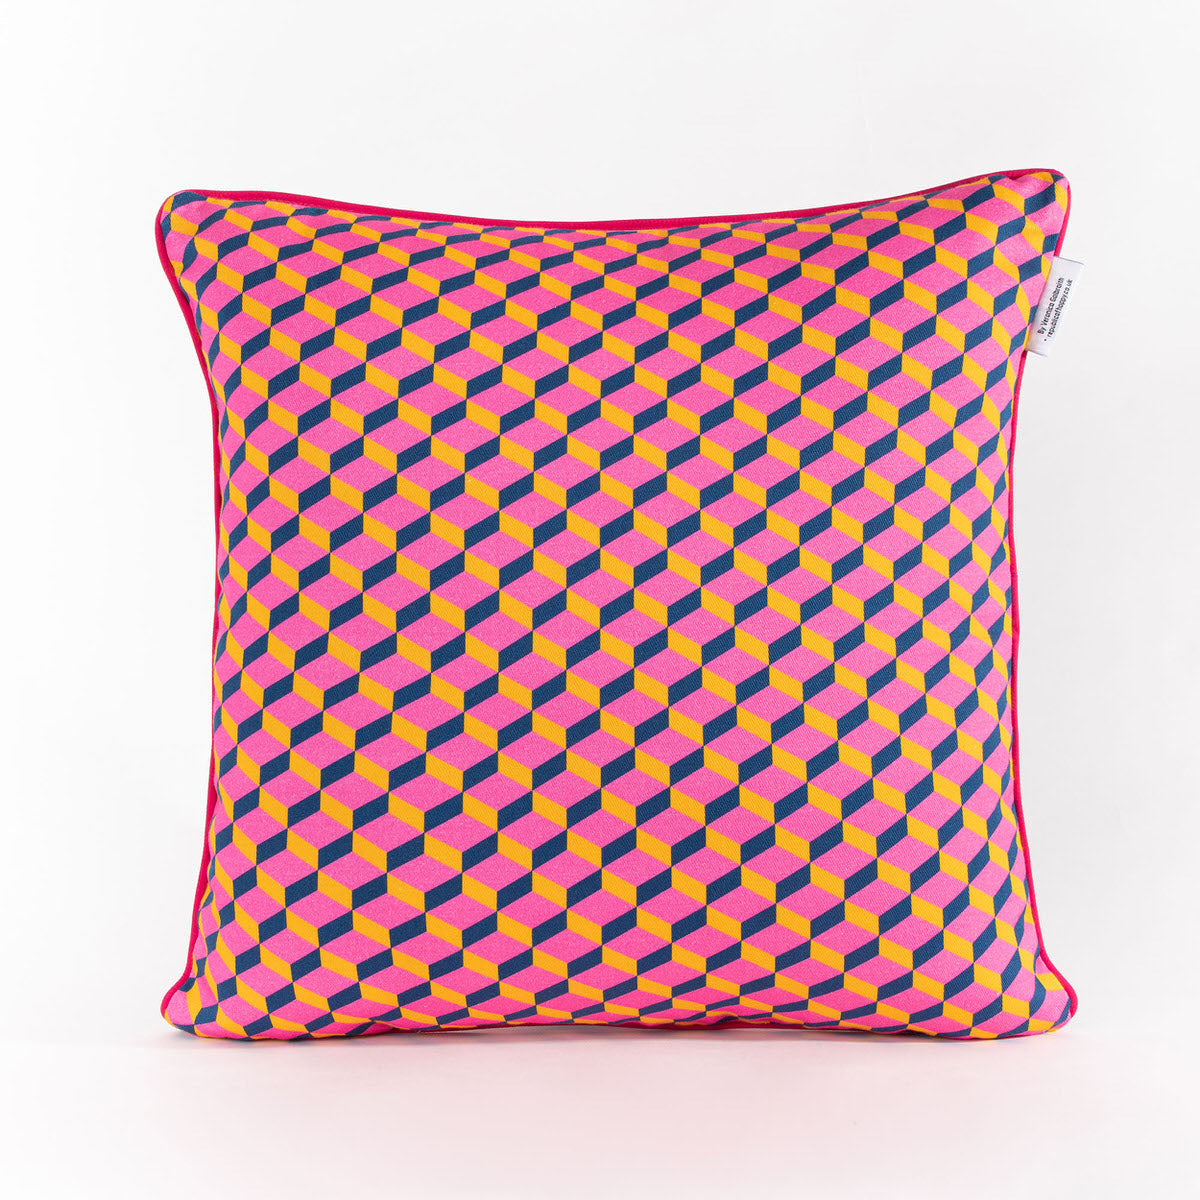 VERTICAL FLOWERS - Bright and colourful double-sided cushion cover